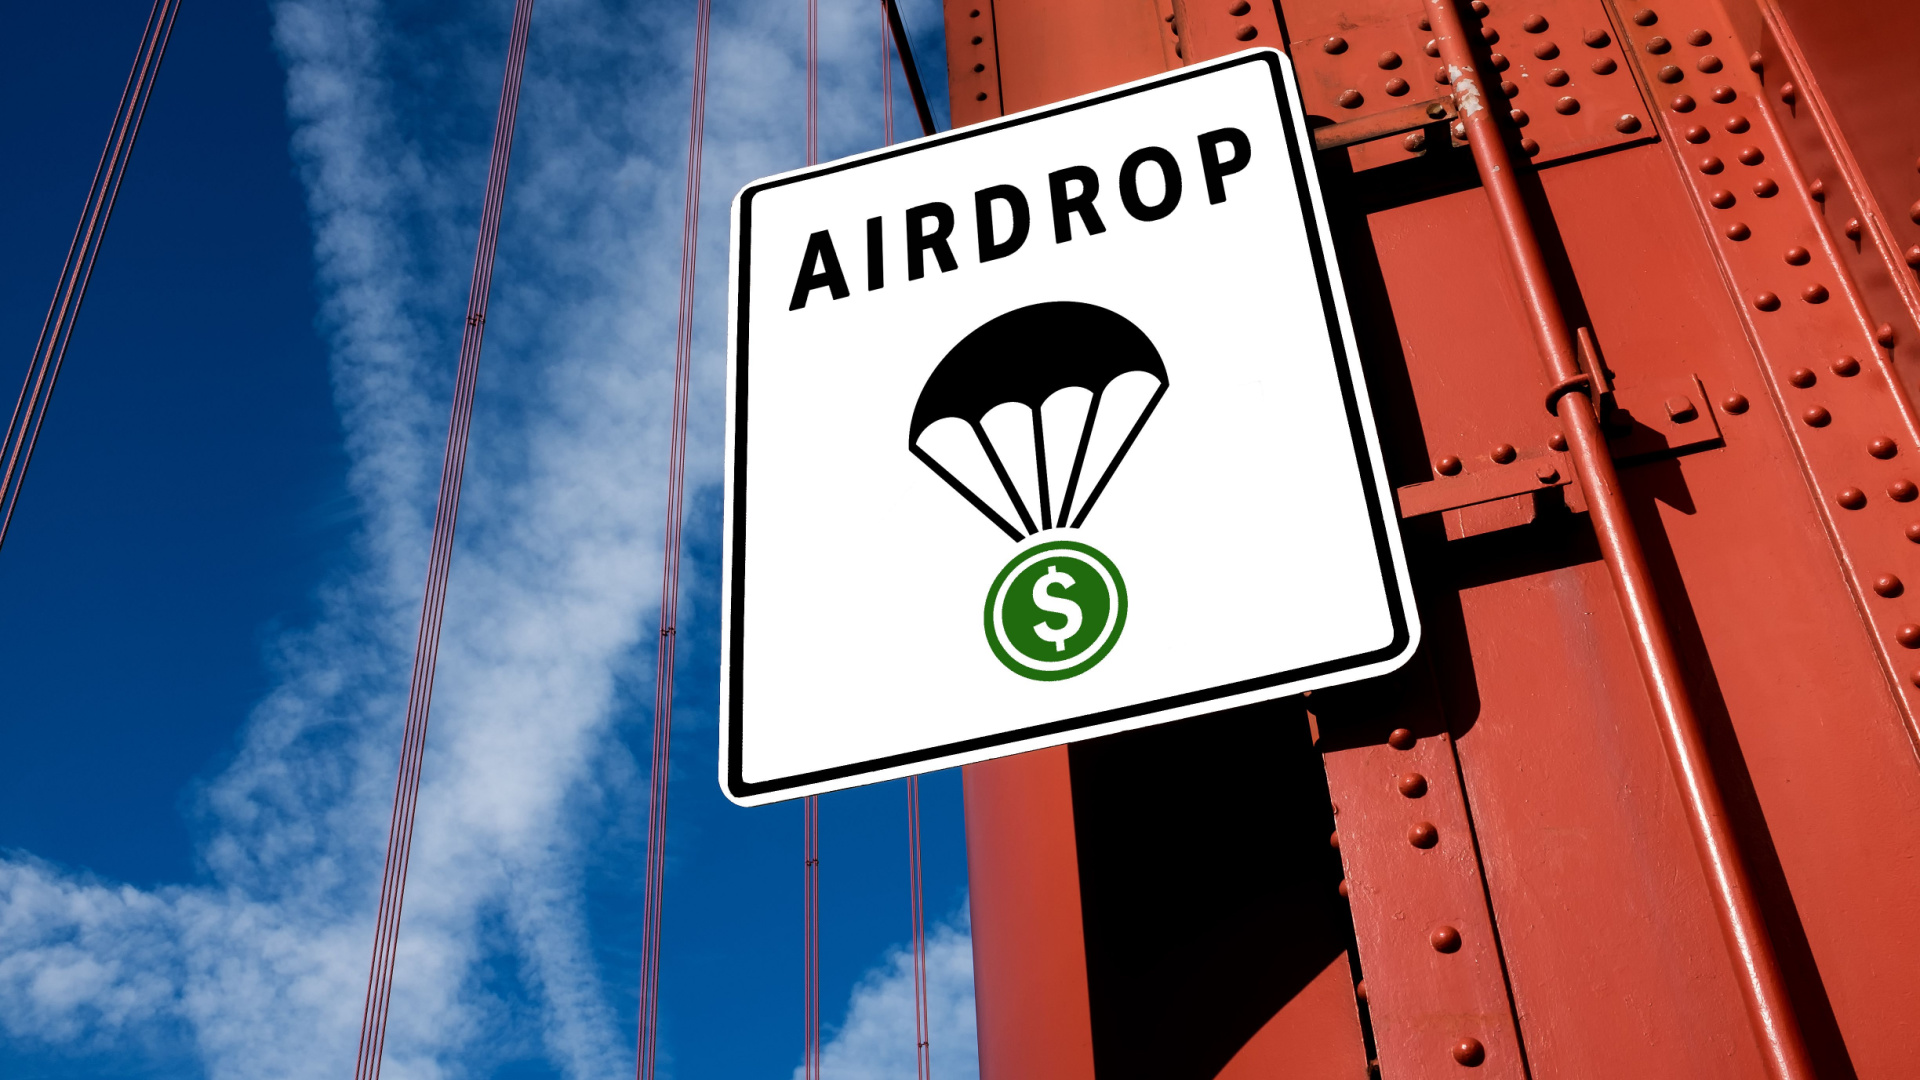 This Project Will Distribute Airdrop of 600 Million Tokens to Over 350 Thousand Wallets